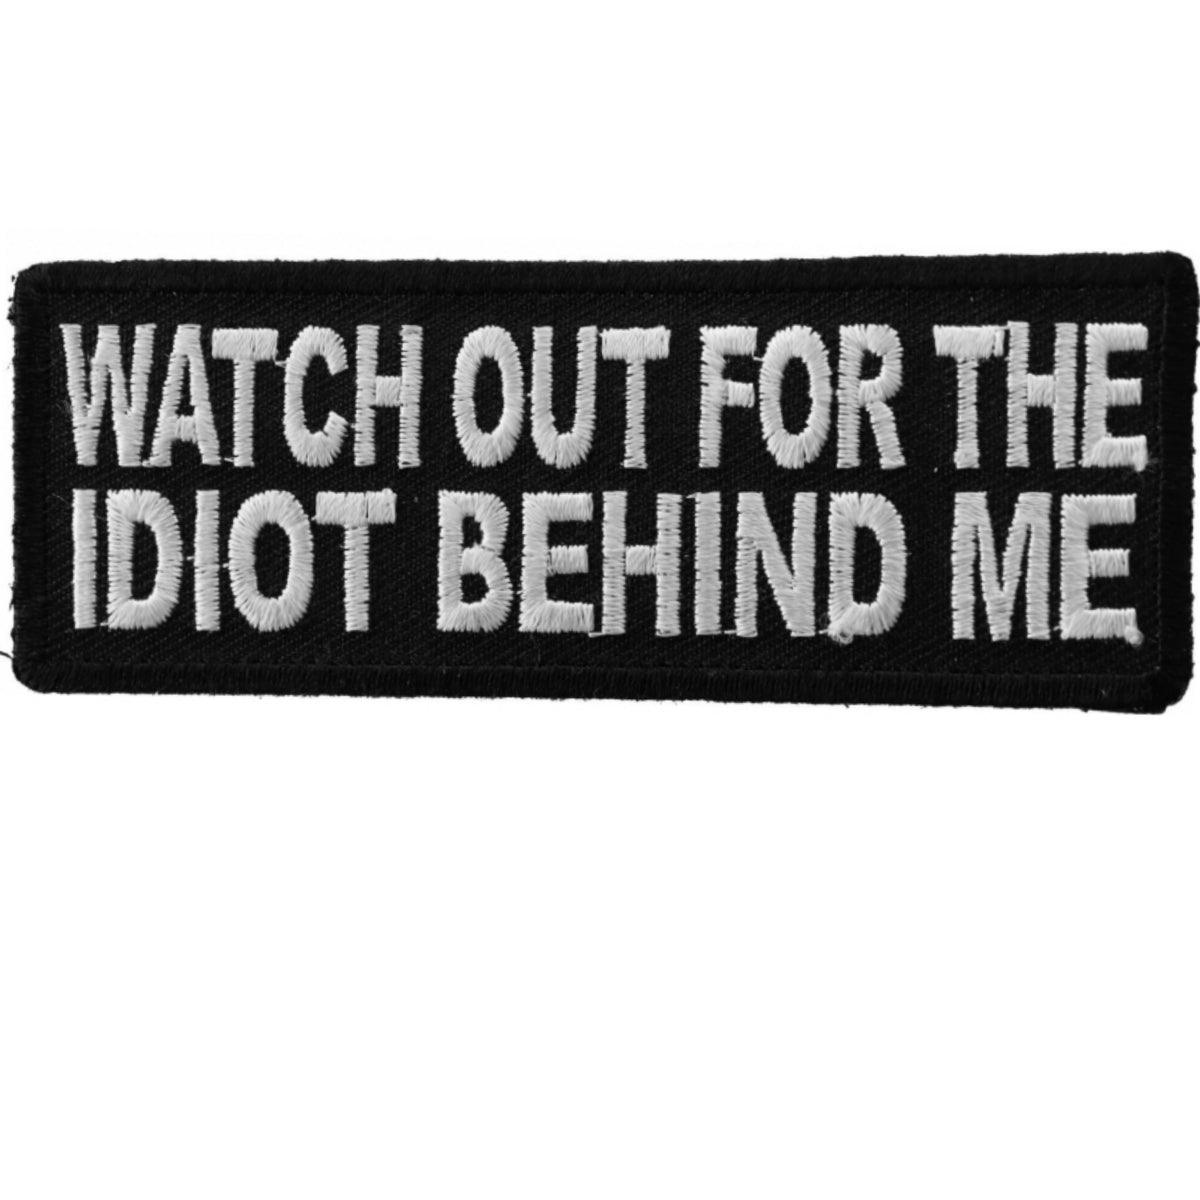 Daniel Smart Watch Out For The Idiot Behind Me Embroidered Iron On Patch, 4 x 1.5 inches - American Legend Rider